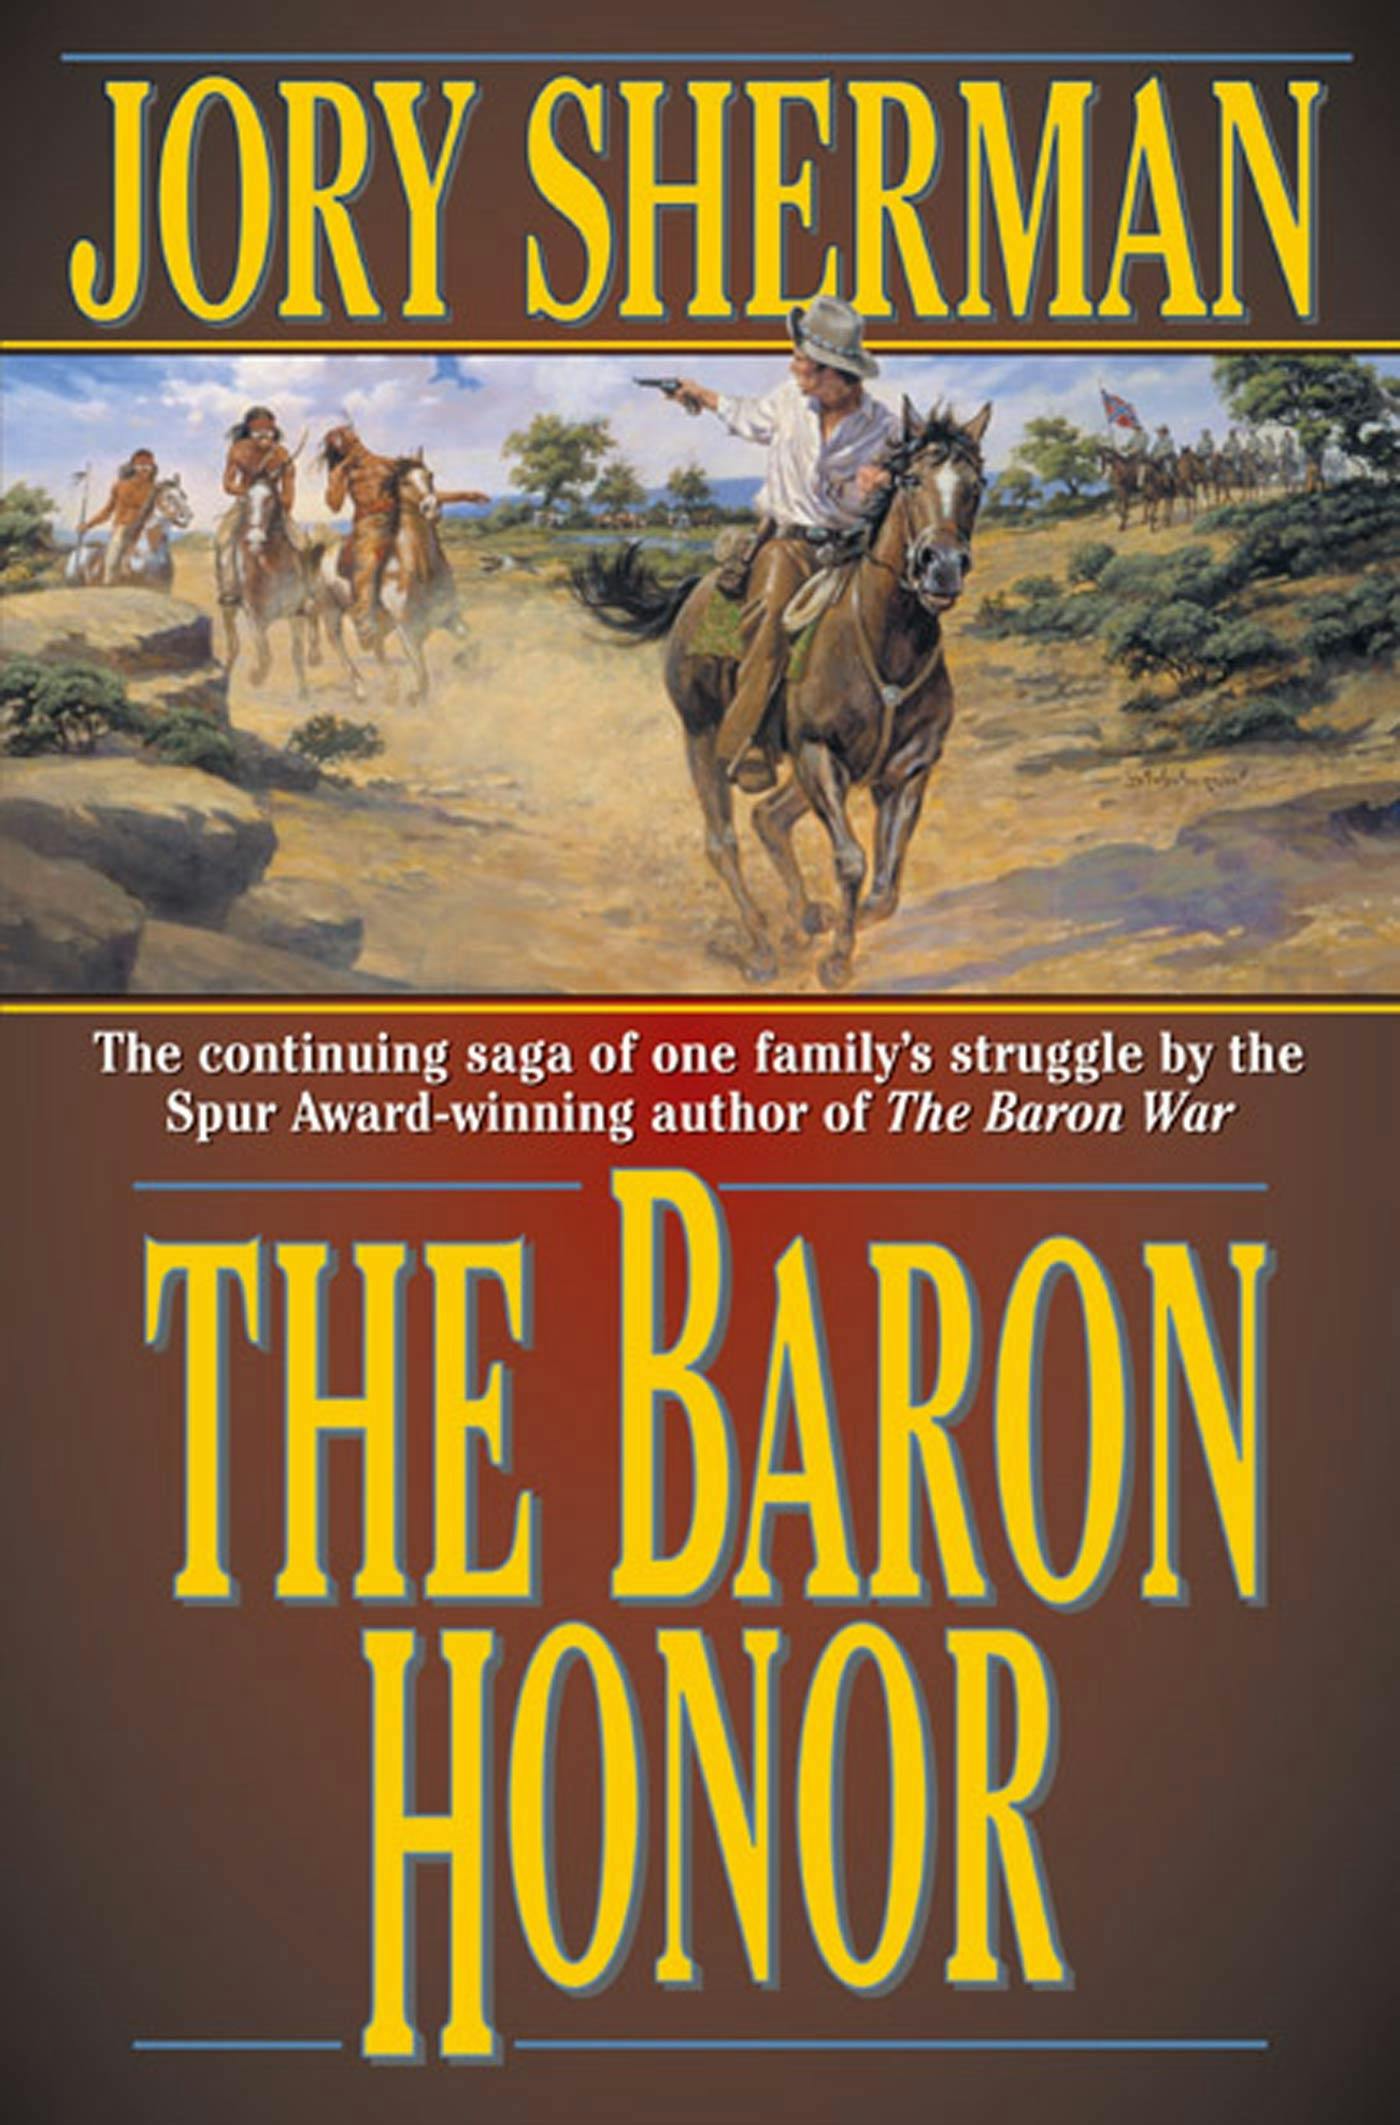 Cover for the book titled as: The Baron Honor